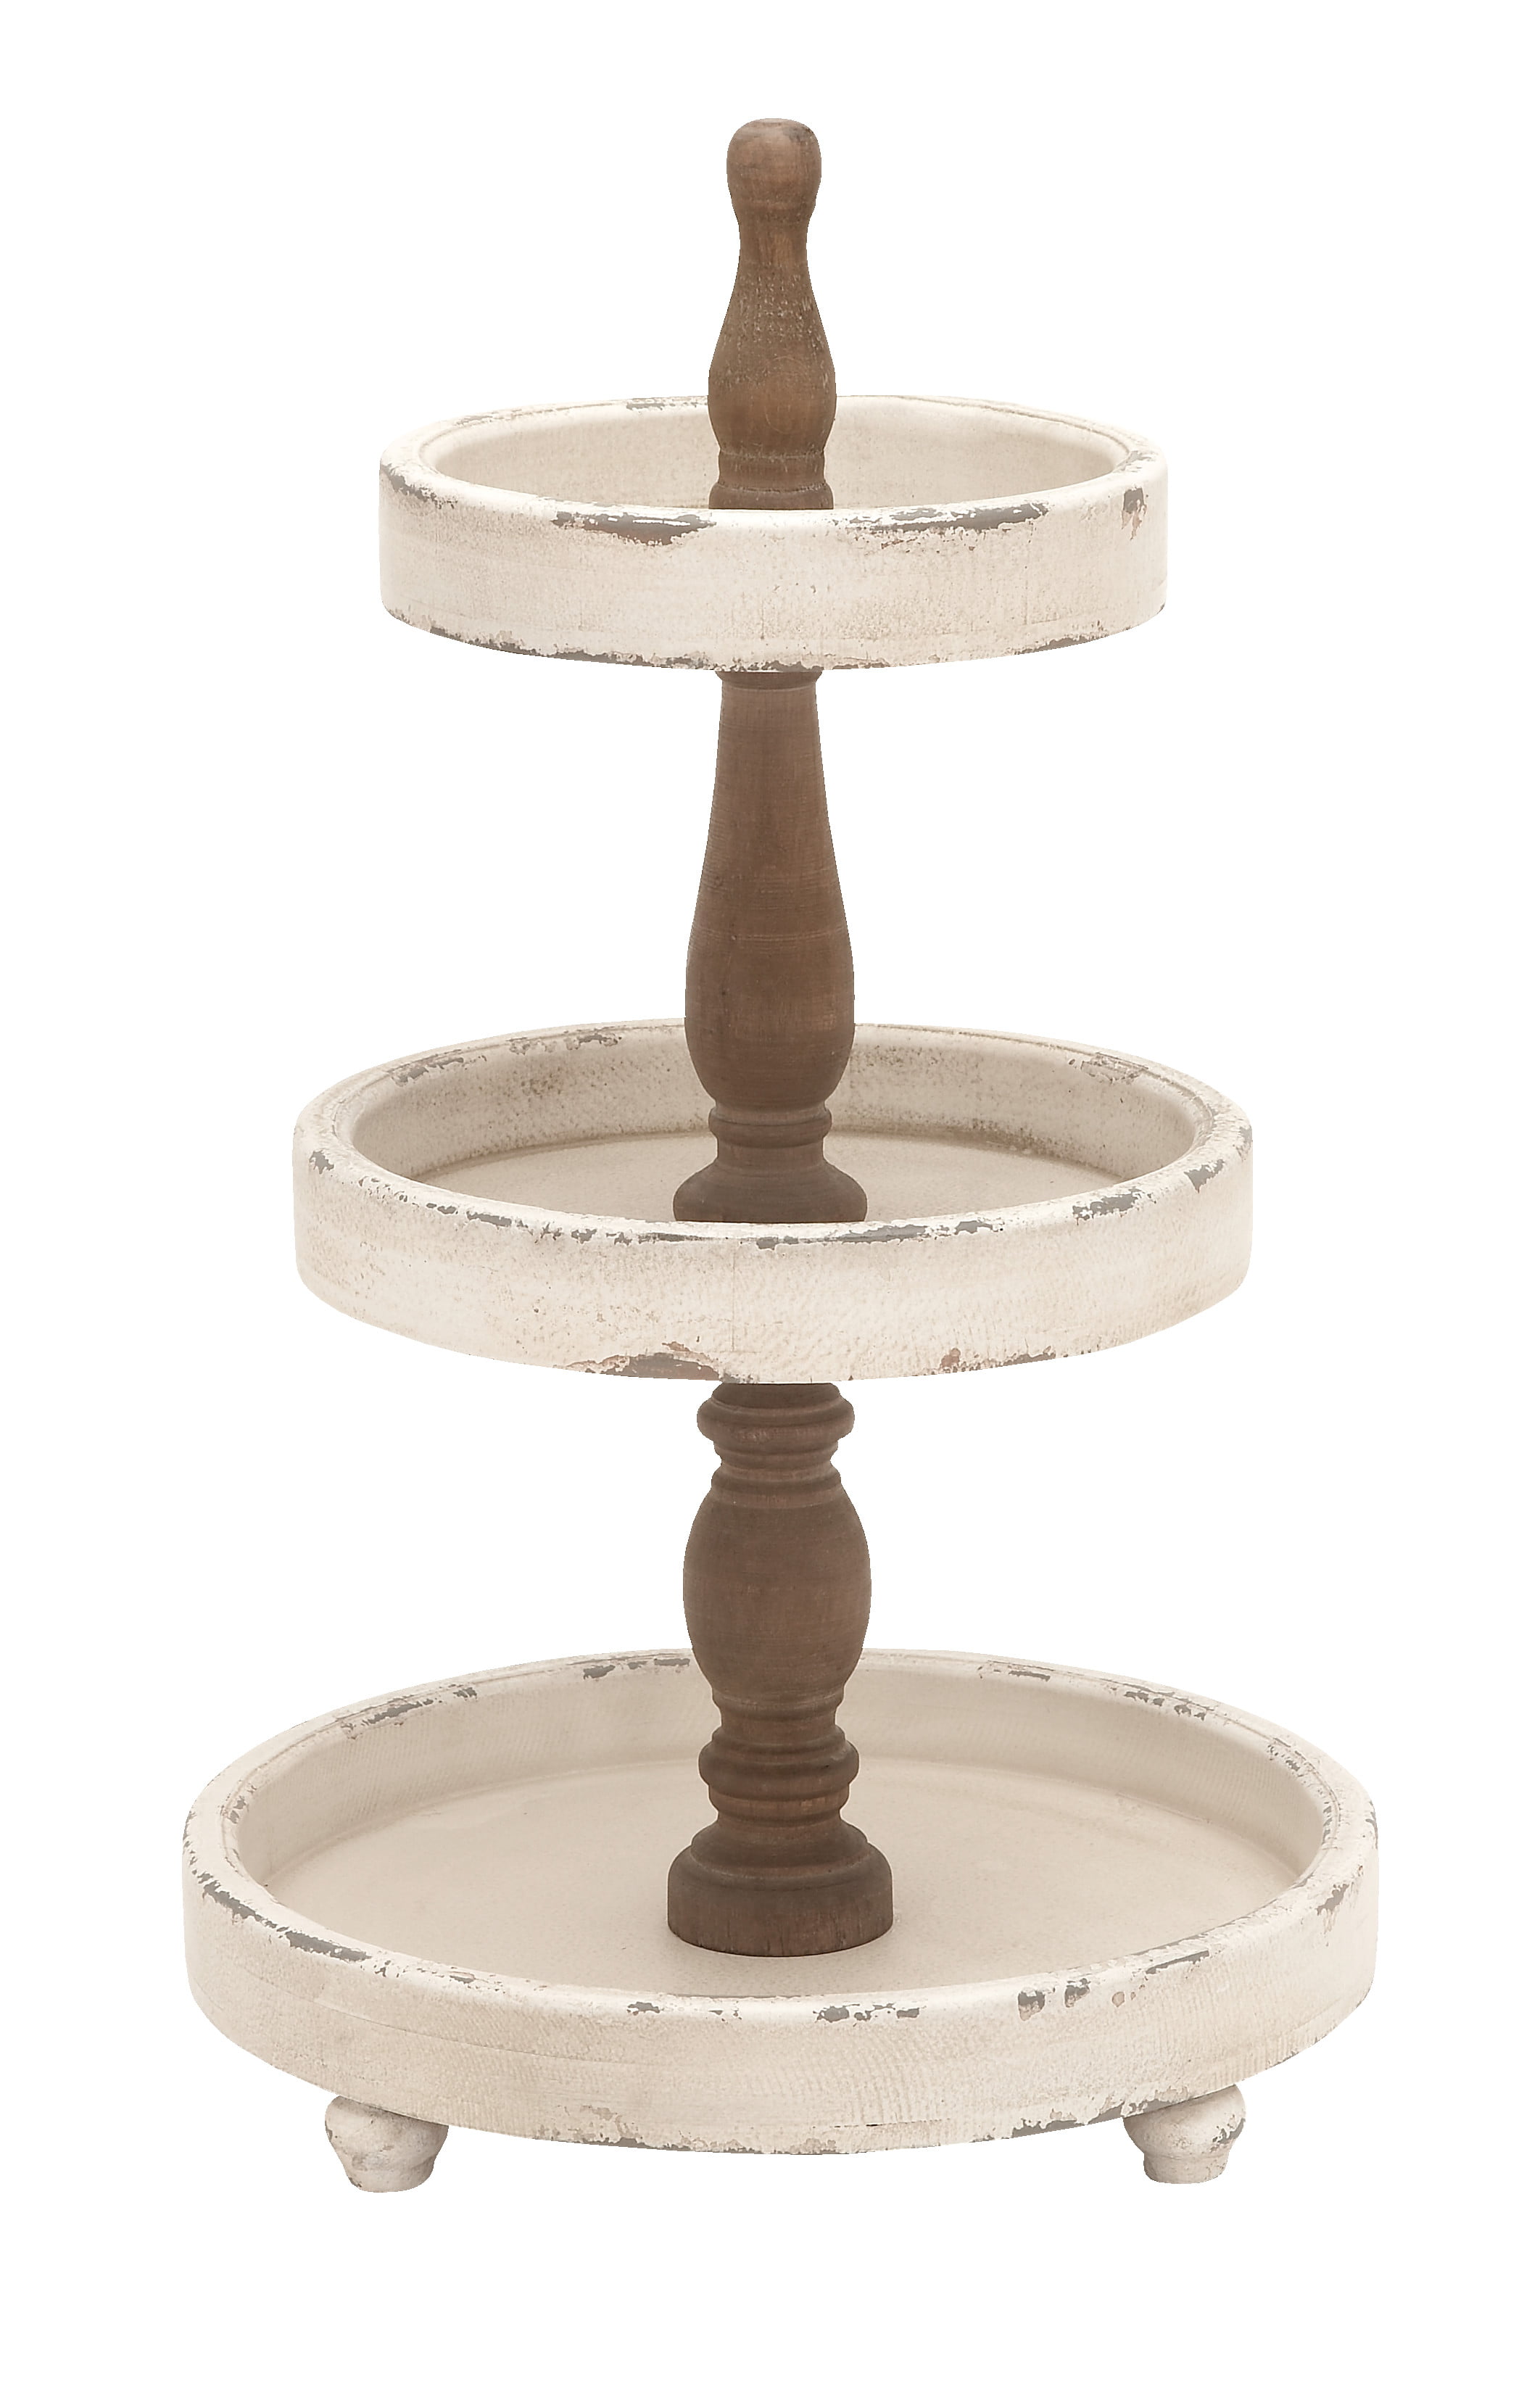 SensaCasa 3 Tiered Tray Three Tier Tray Adjustable to Two Trays: a Two Tiered Tray and a Decorative Tray Wood Farmhouse 3 Tier Tray White Rustic 3 Tier Tray or 2 Tier Tray and a single Tray